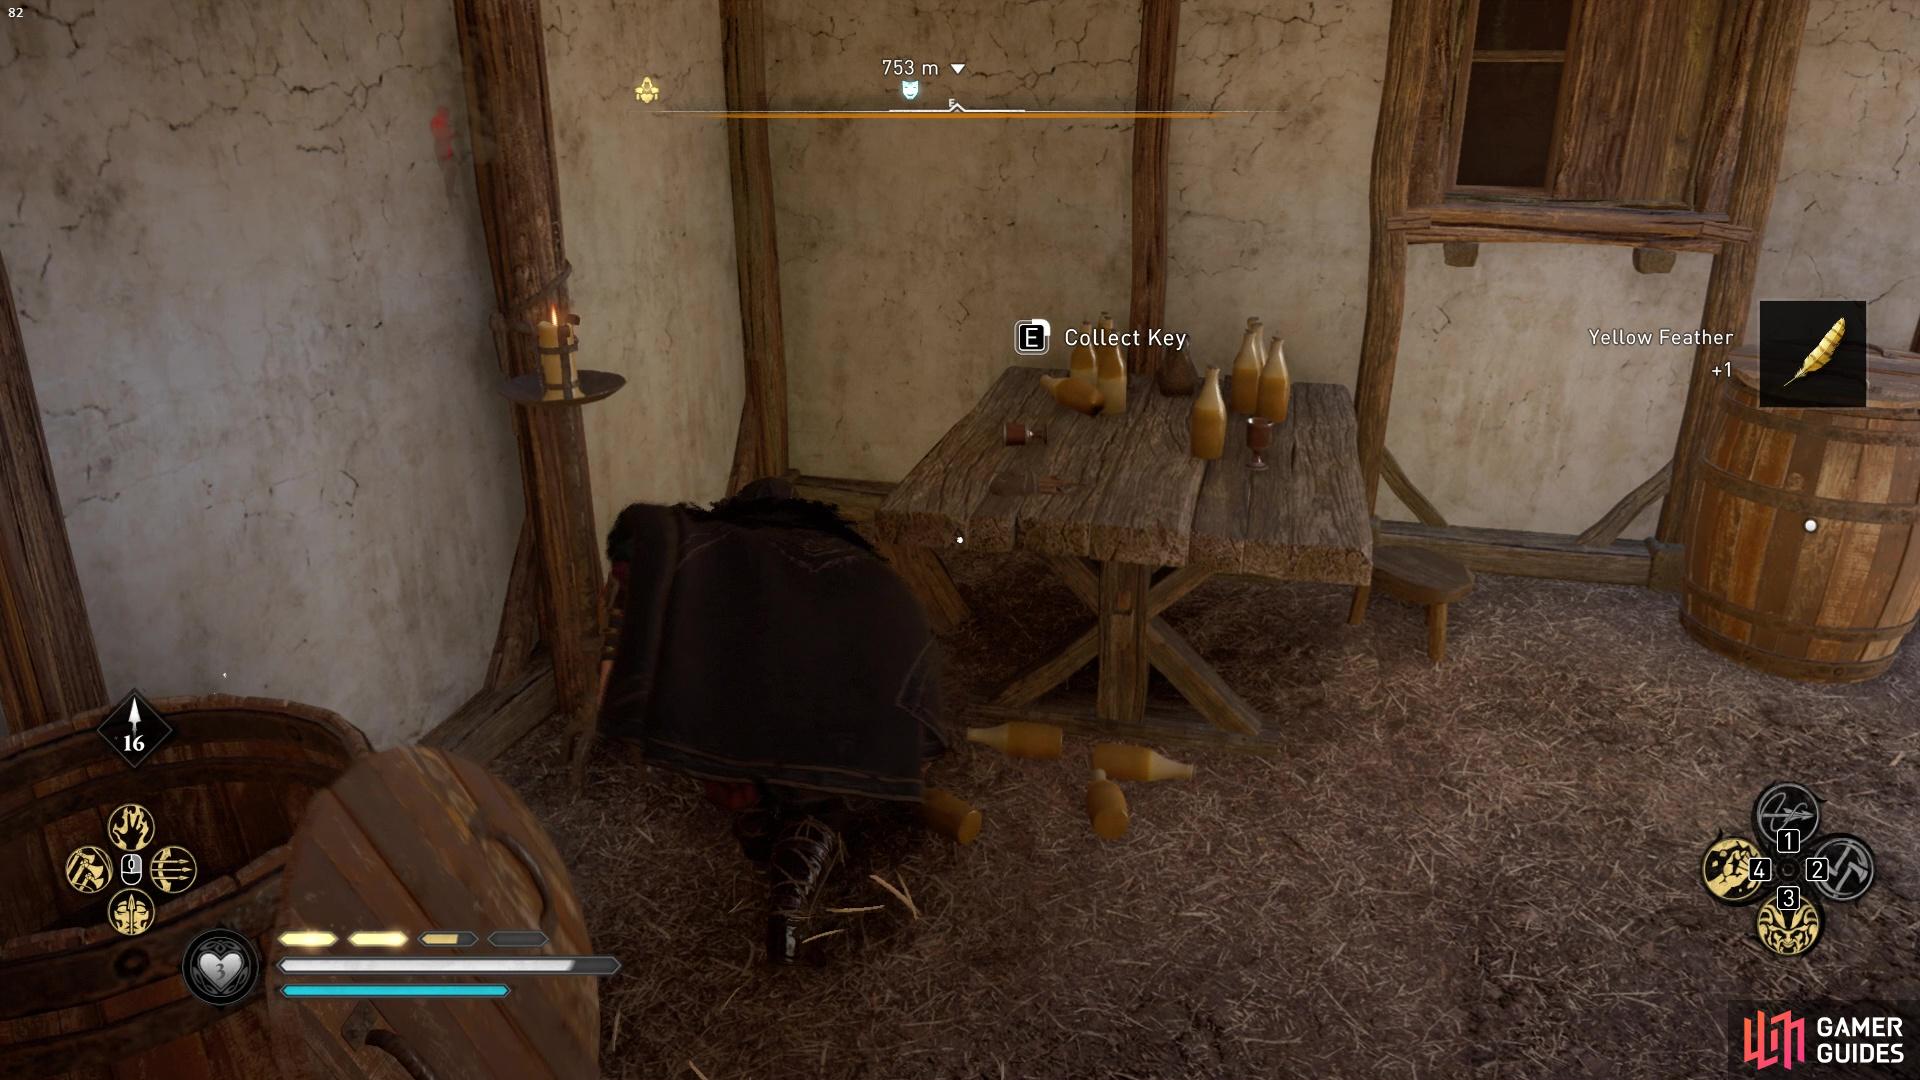 Youll need two keys to unlock the chest. One is found in one of the central buildings of the settlement.